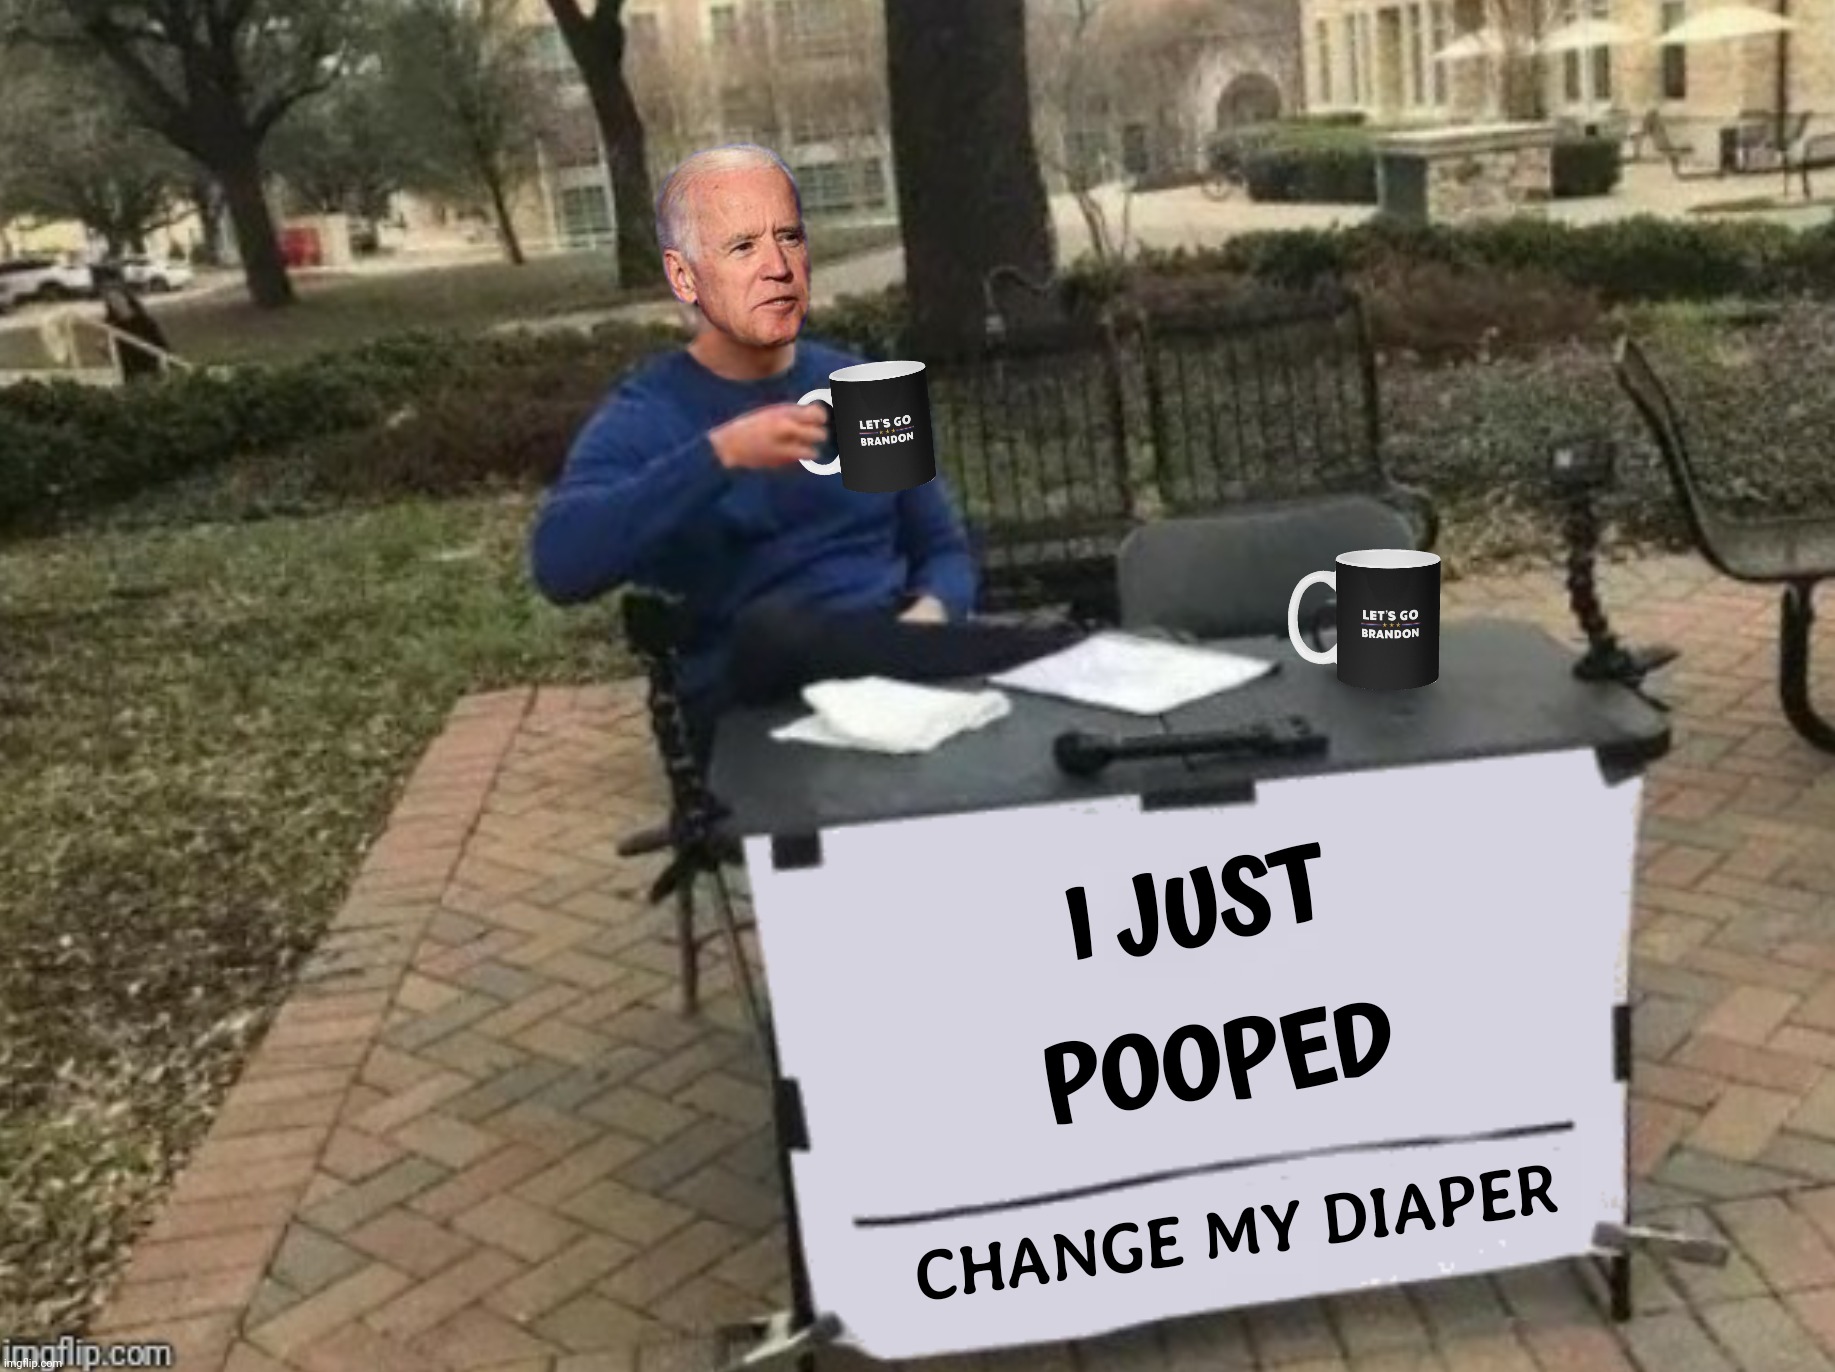 The face you make when you discharge your doodies | image tagged in bad photoshop,joe biden,change my mind,change my diaper,let's go brandon | made w/ Imgflip meme maker